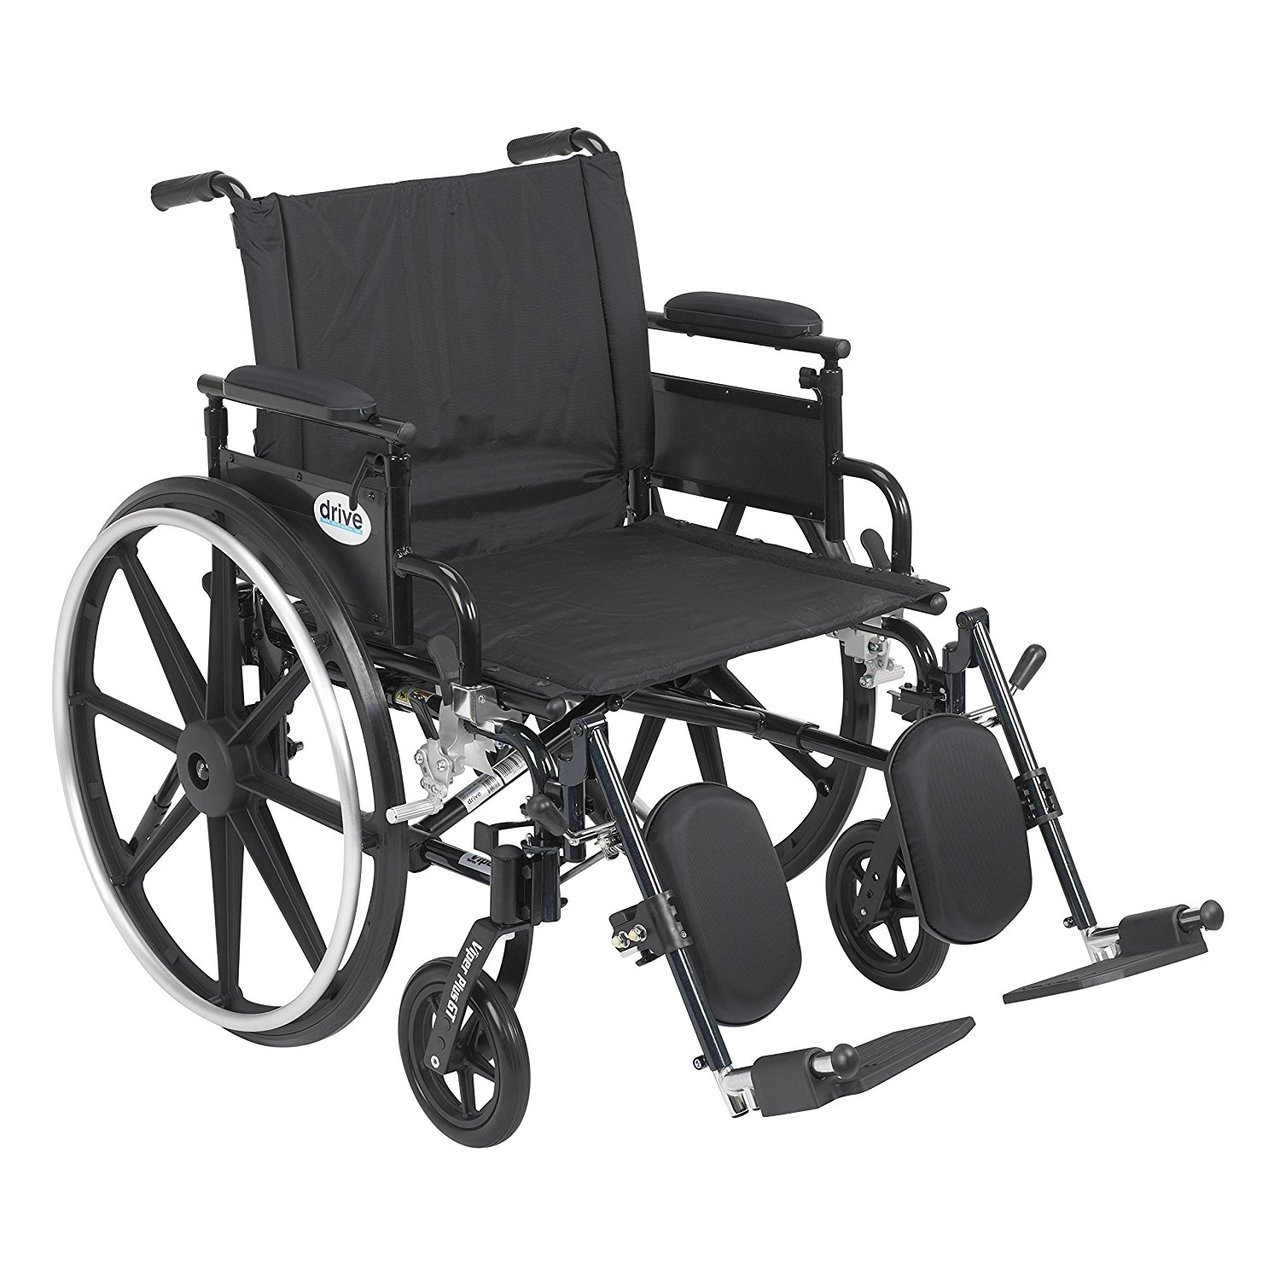 Drive PLA422FBDAAR-ELR Viper Plus GT Wheelchair with Flip Back Removable Adjustable Desk Arms, Elevating Leg Rests, 22" Seat